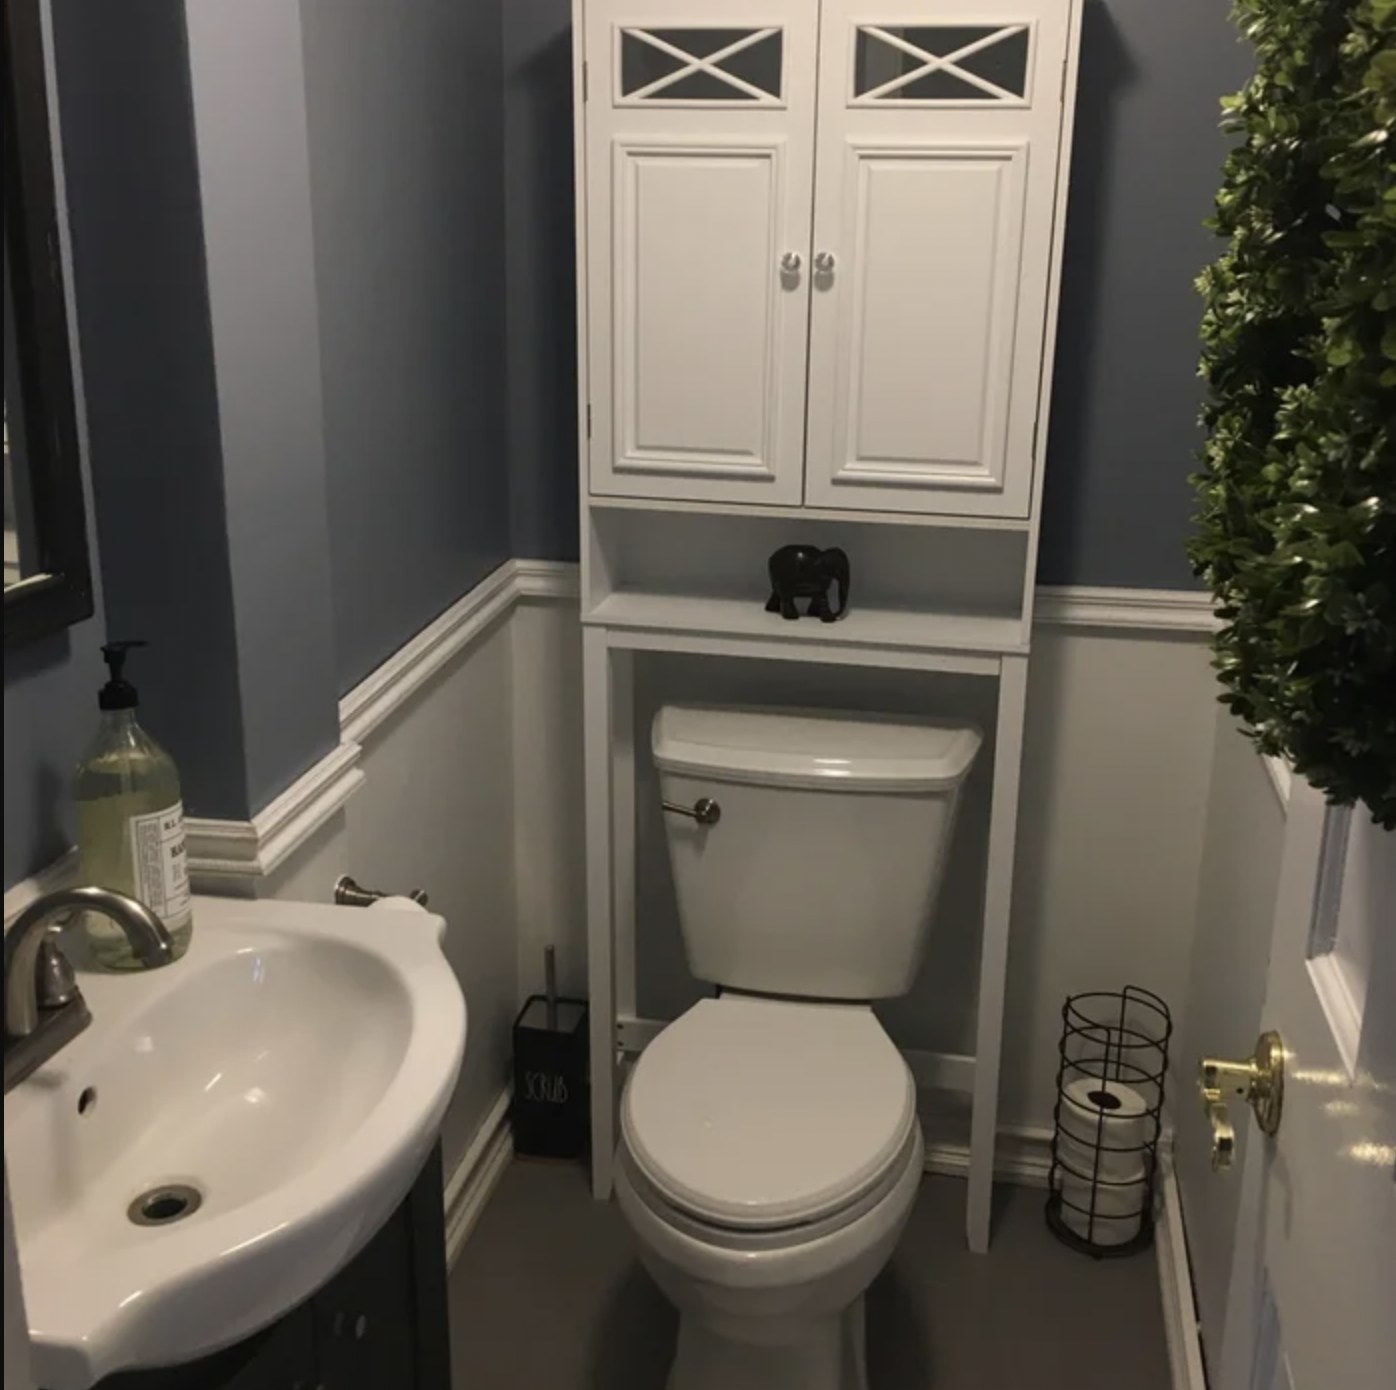 reviewer&#x27;s photo of the white storage unit installed over the toilet